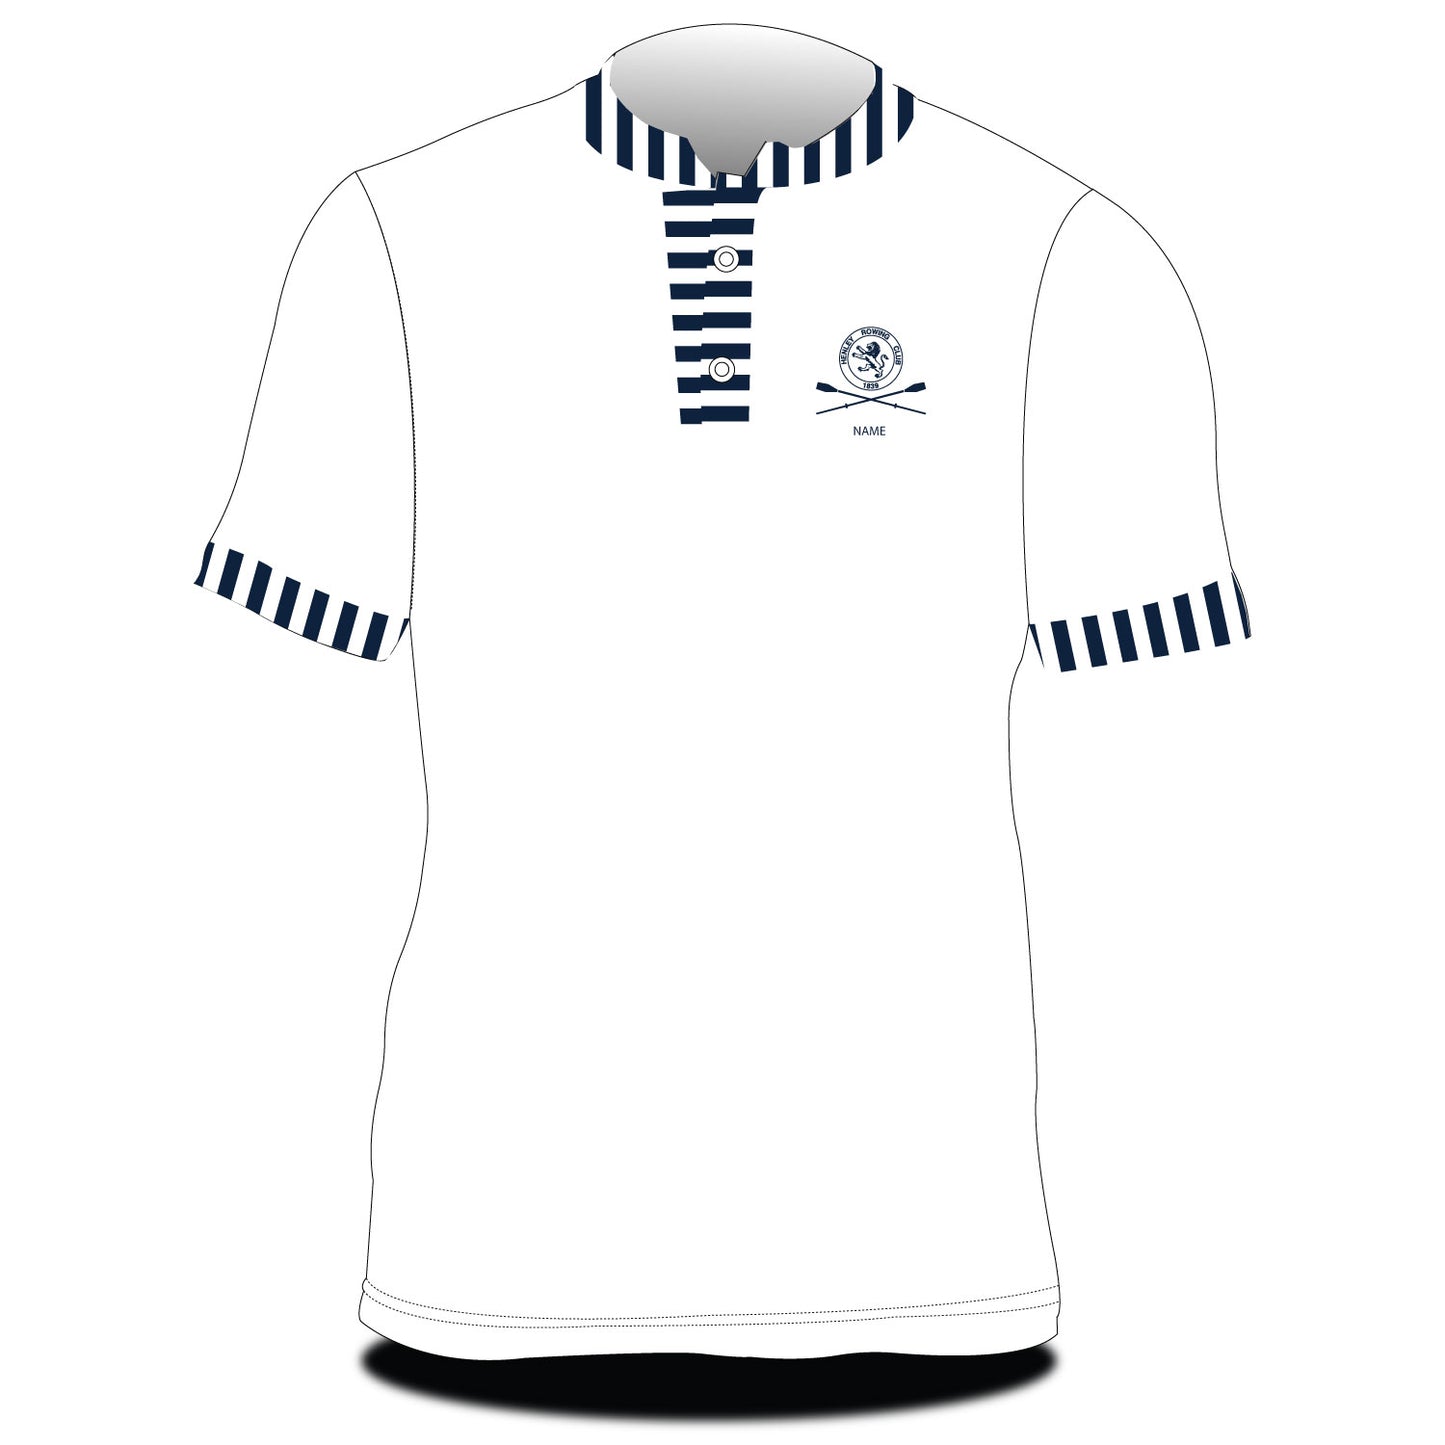 Henley RC Traditional Zephyr - Front Personalisation